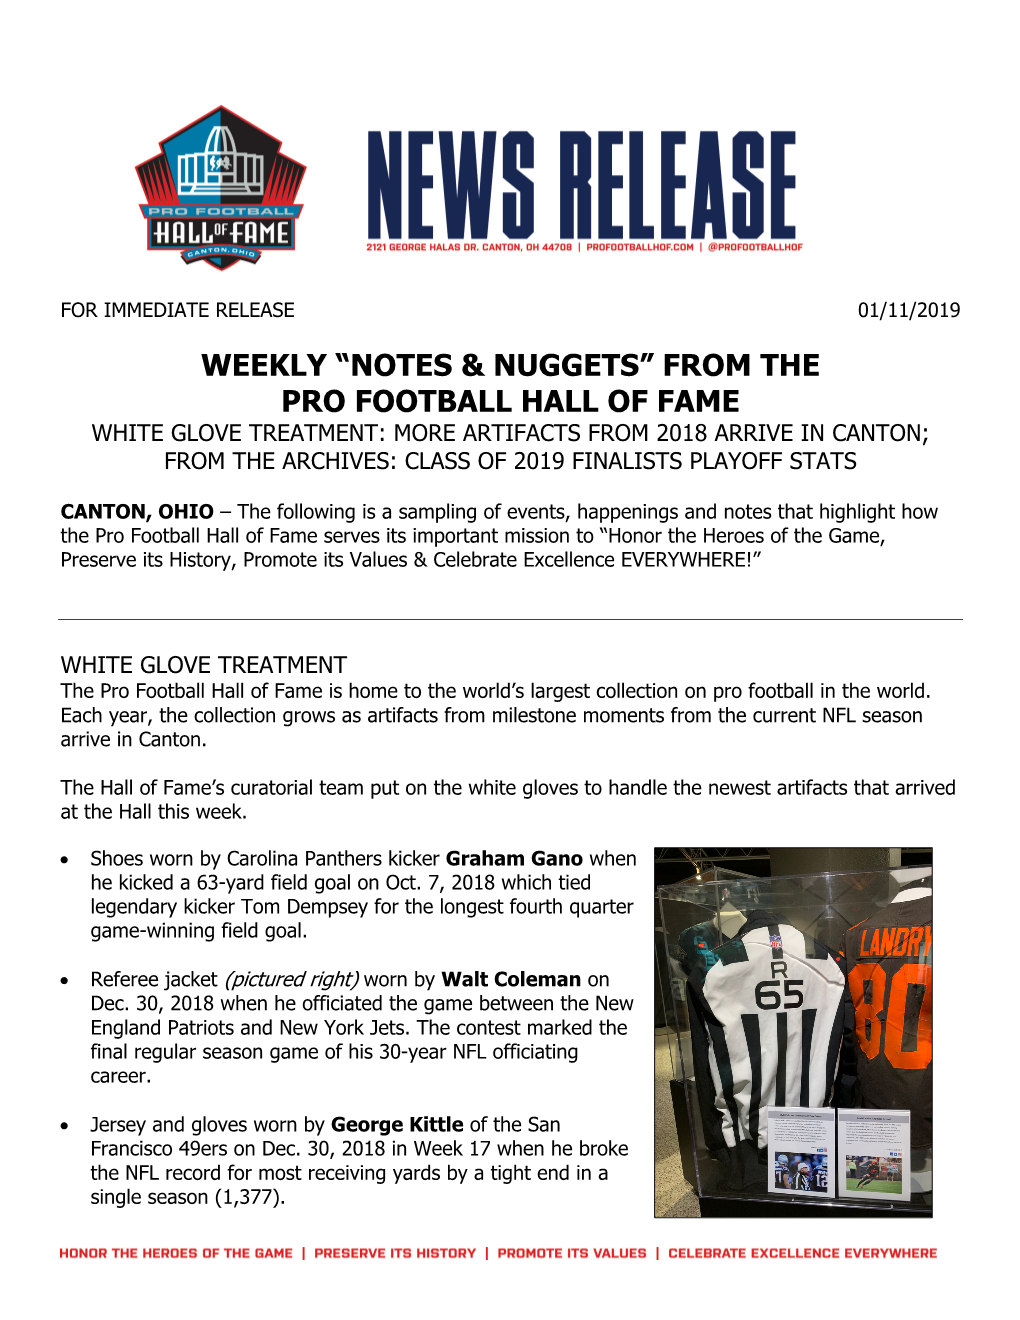 Weekly “Notes & Nuggets”